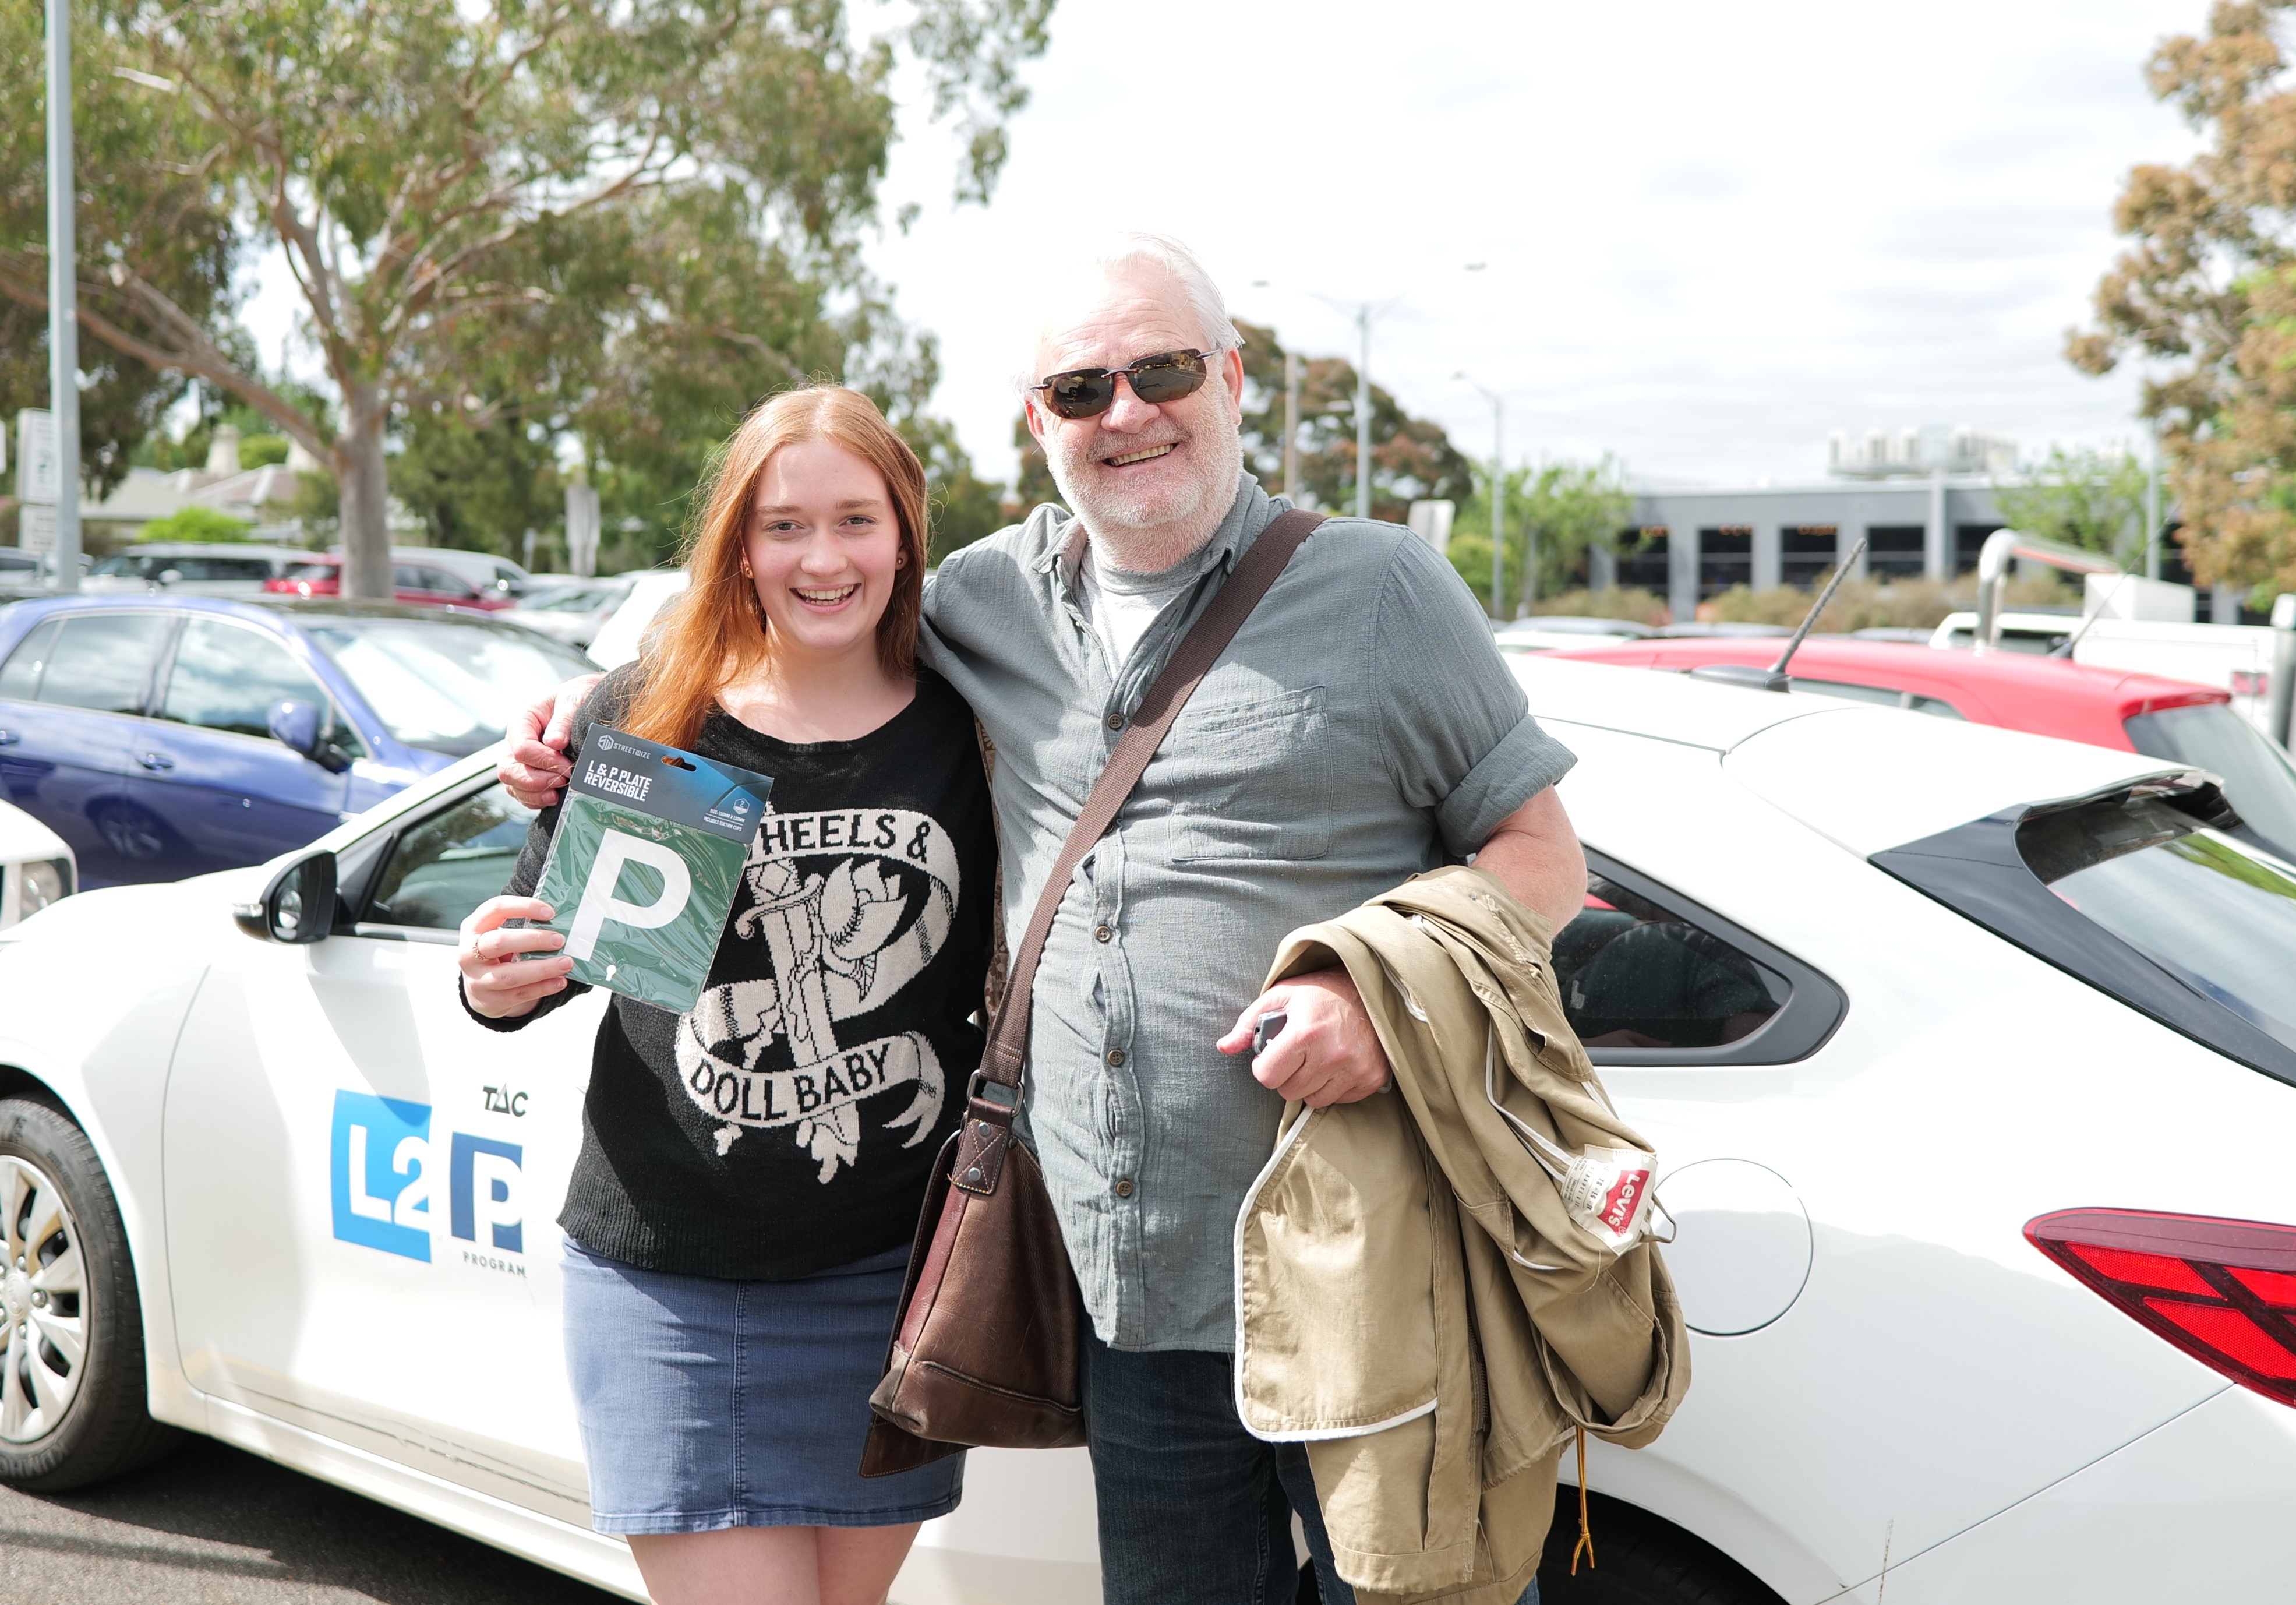 Young woman holding a P plate next to older man and in front of a car